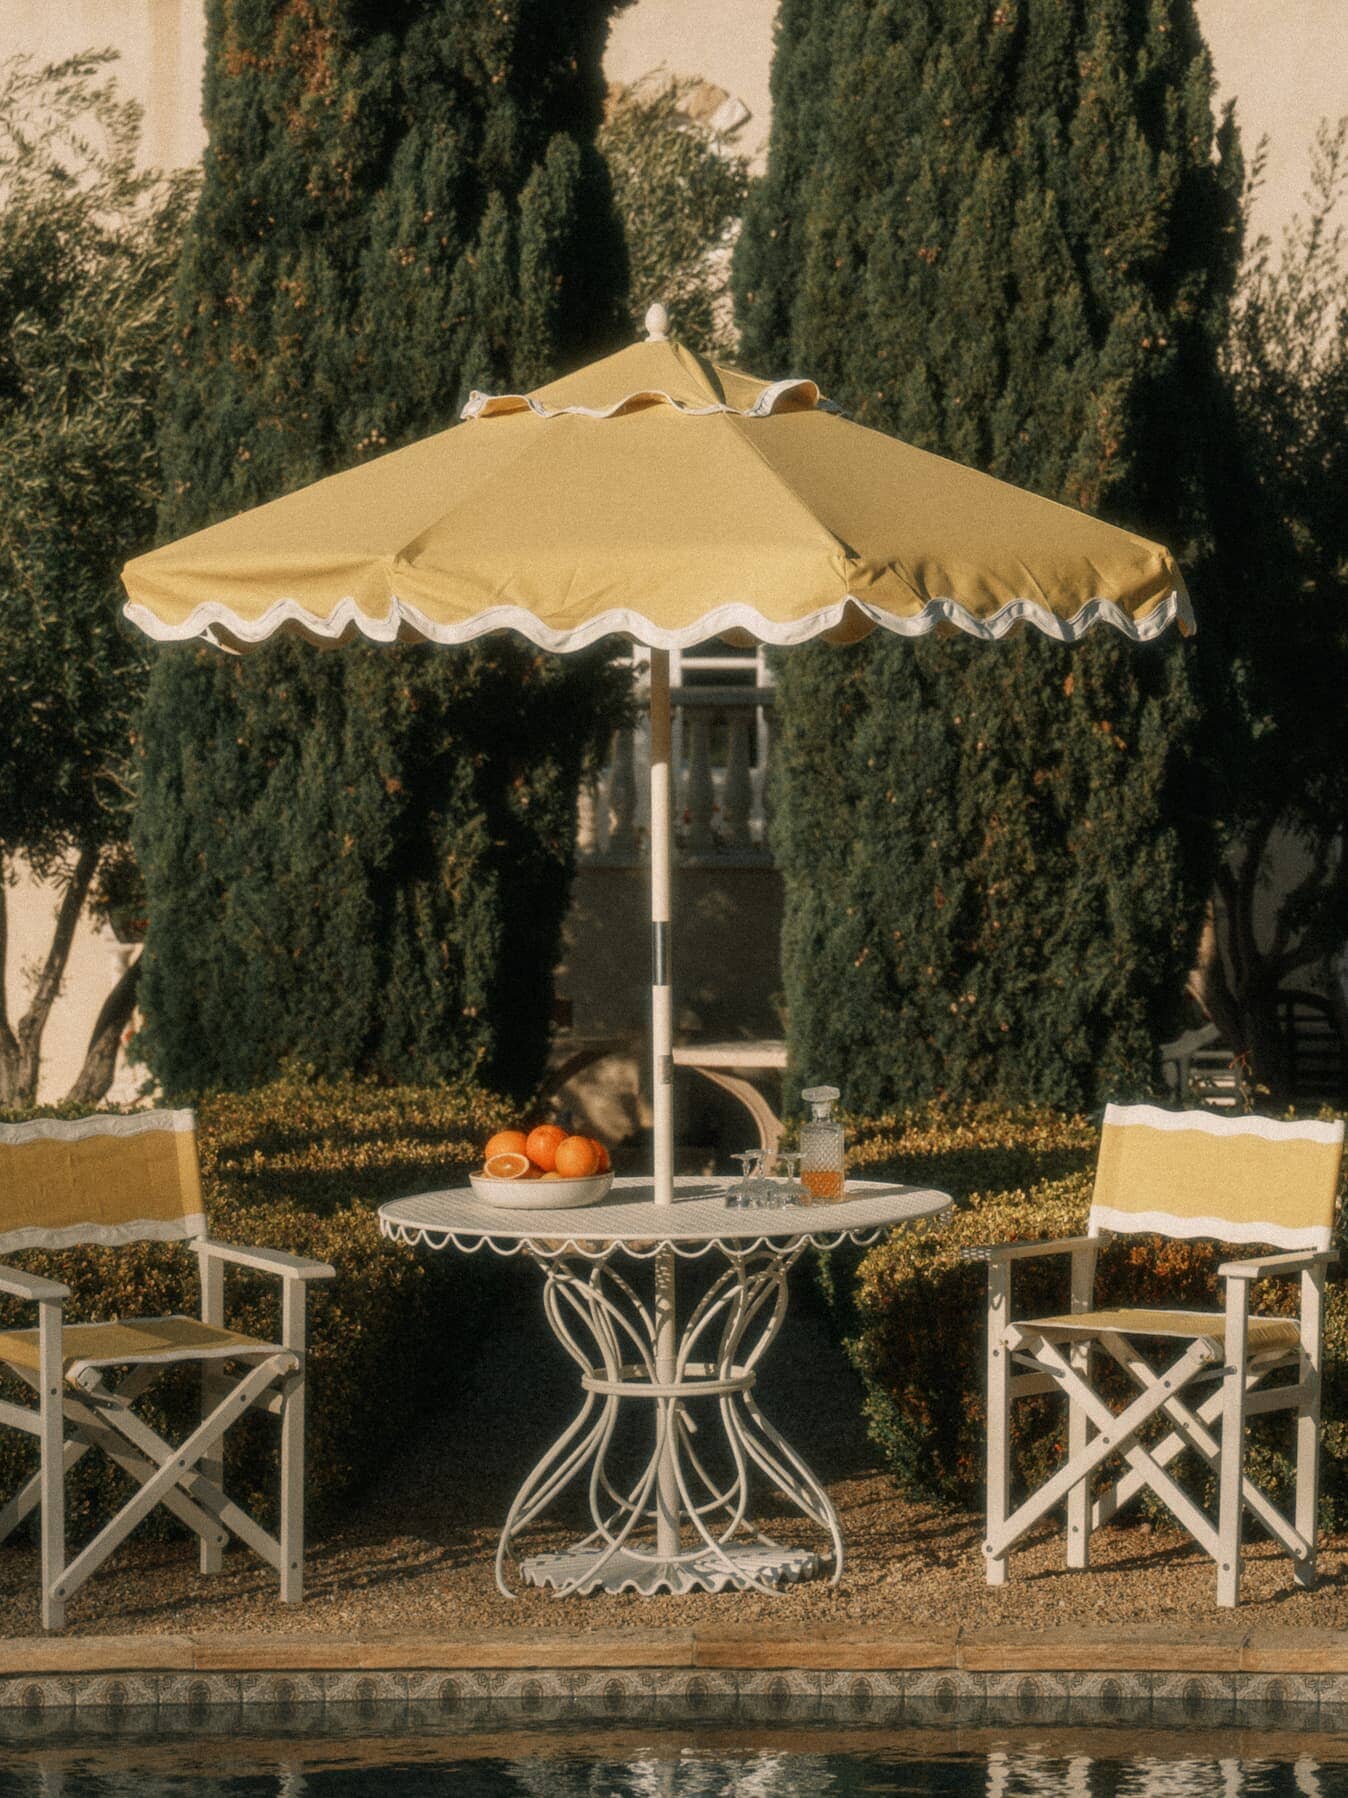 outdoor setting with riviera mimosa market umbrella and directors chairs